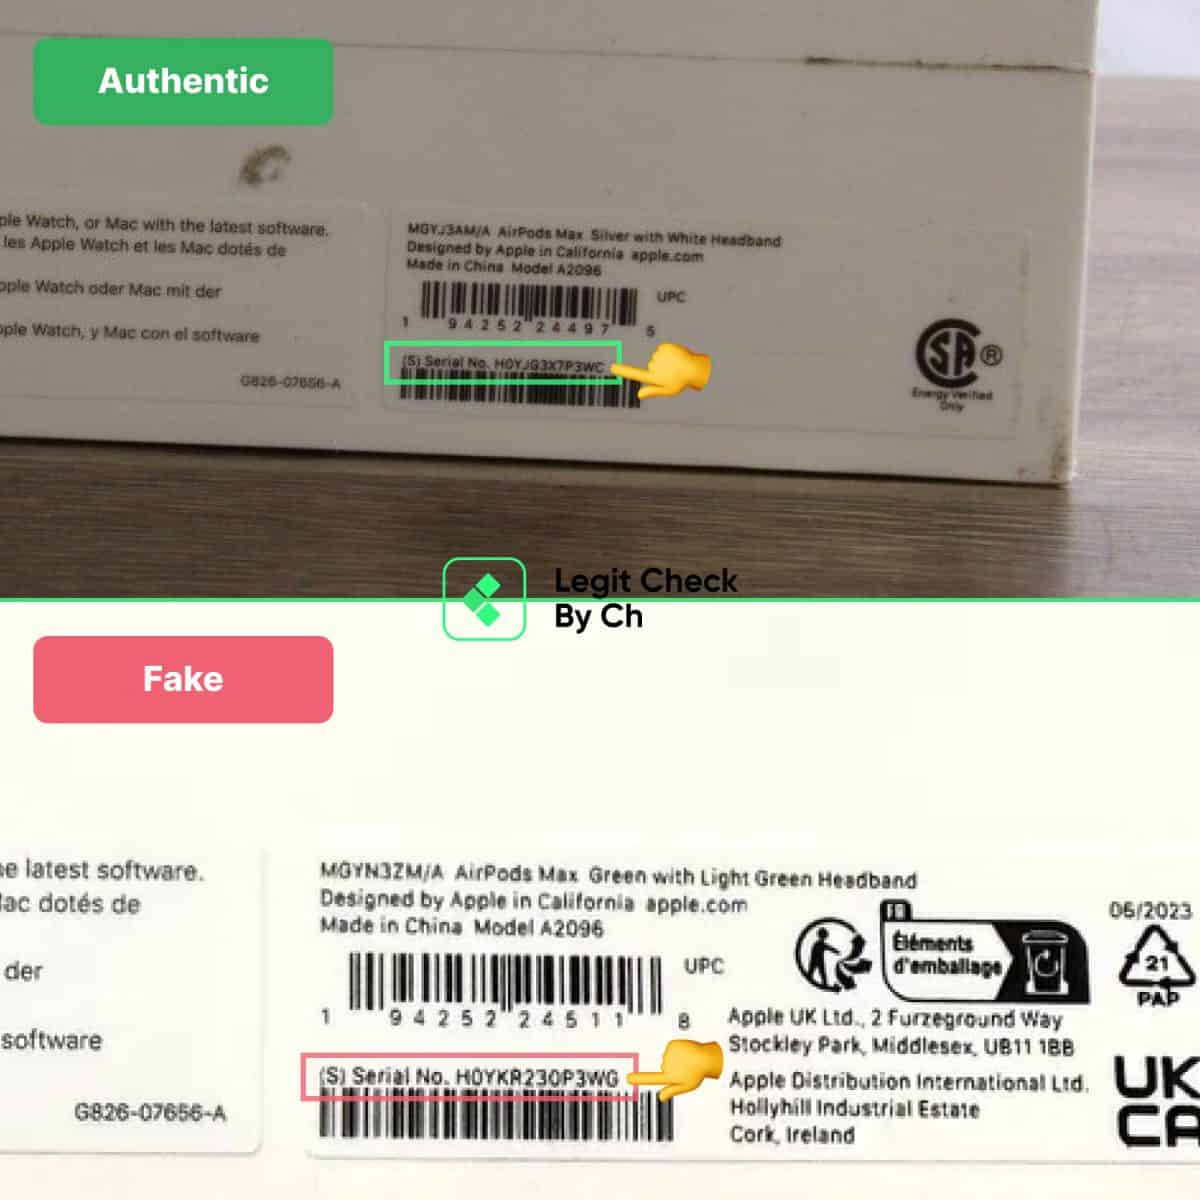 Authentic Vs Fake AirPods Max Serial Number on the box